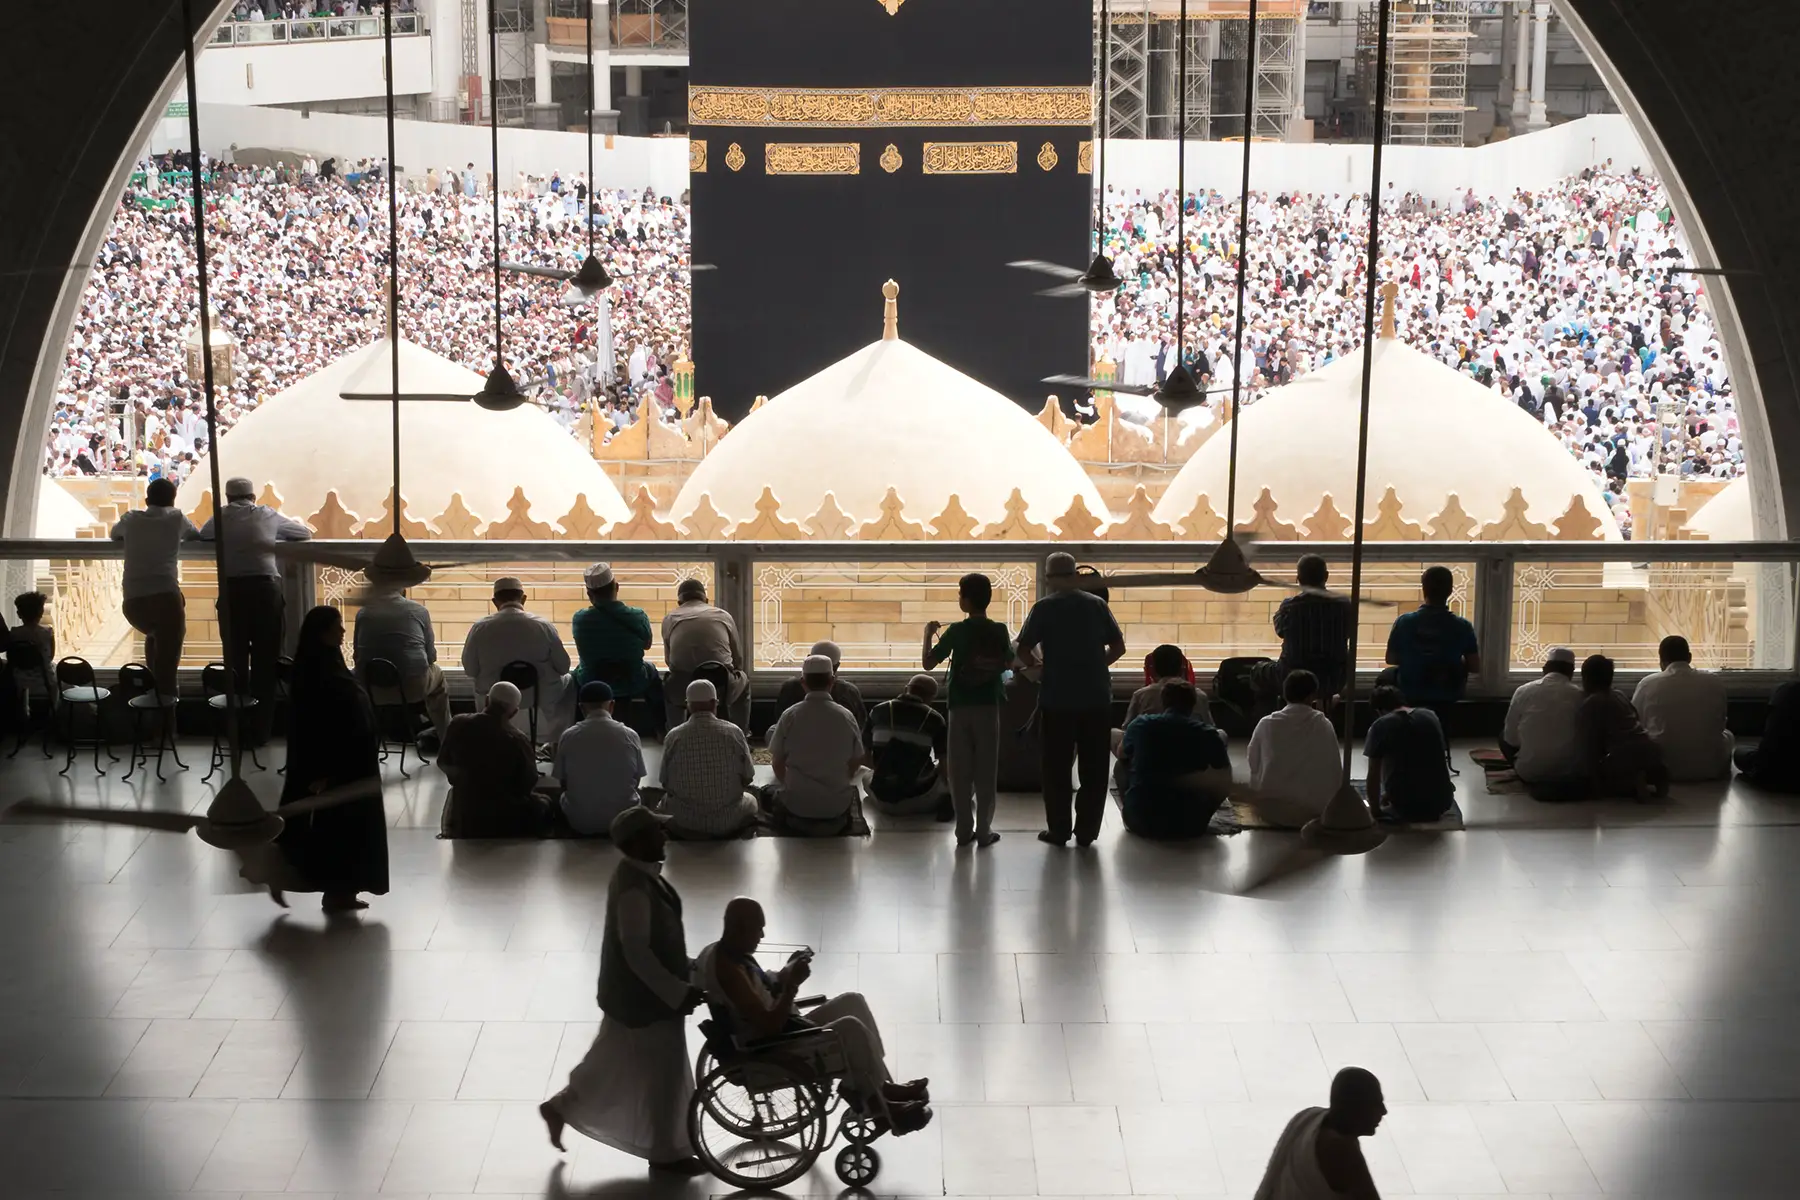 The Kaaba in Mecca is accessible to pilgrims with disabilities